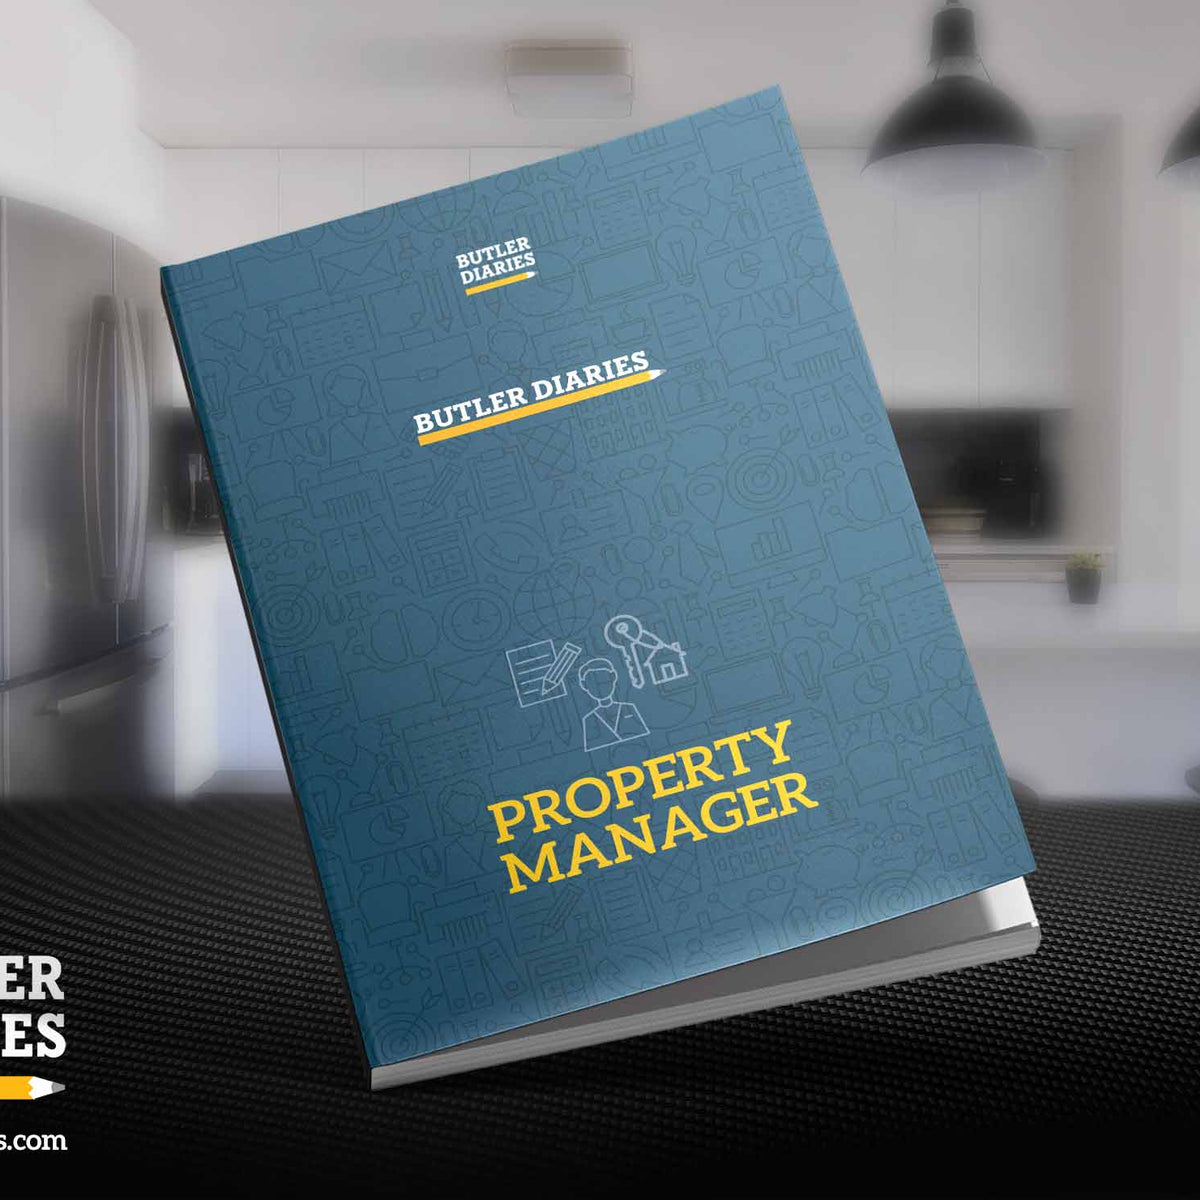 2023 Butler Professional Diaries: PROPERTY MANAGER - Butler Diaries